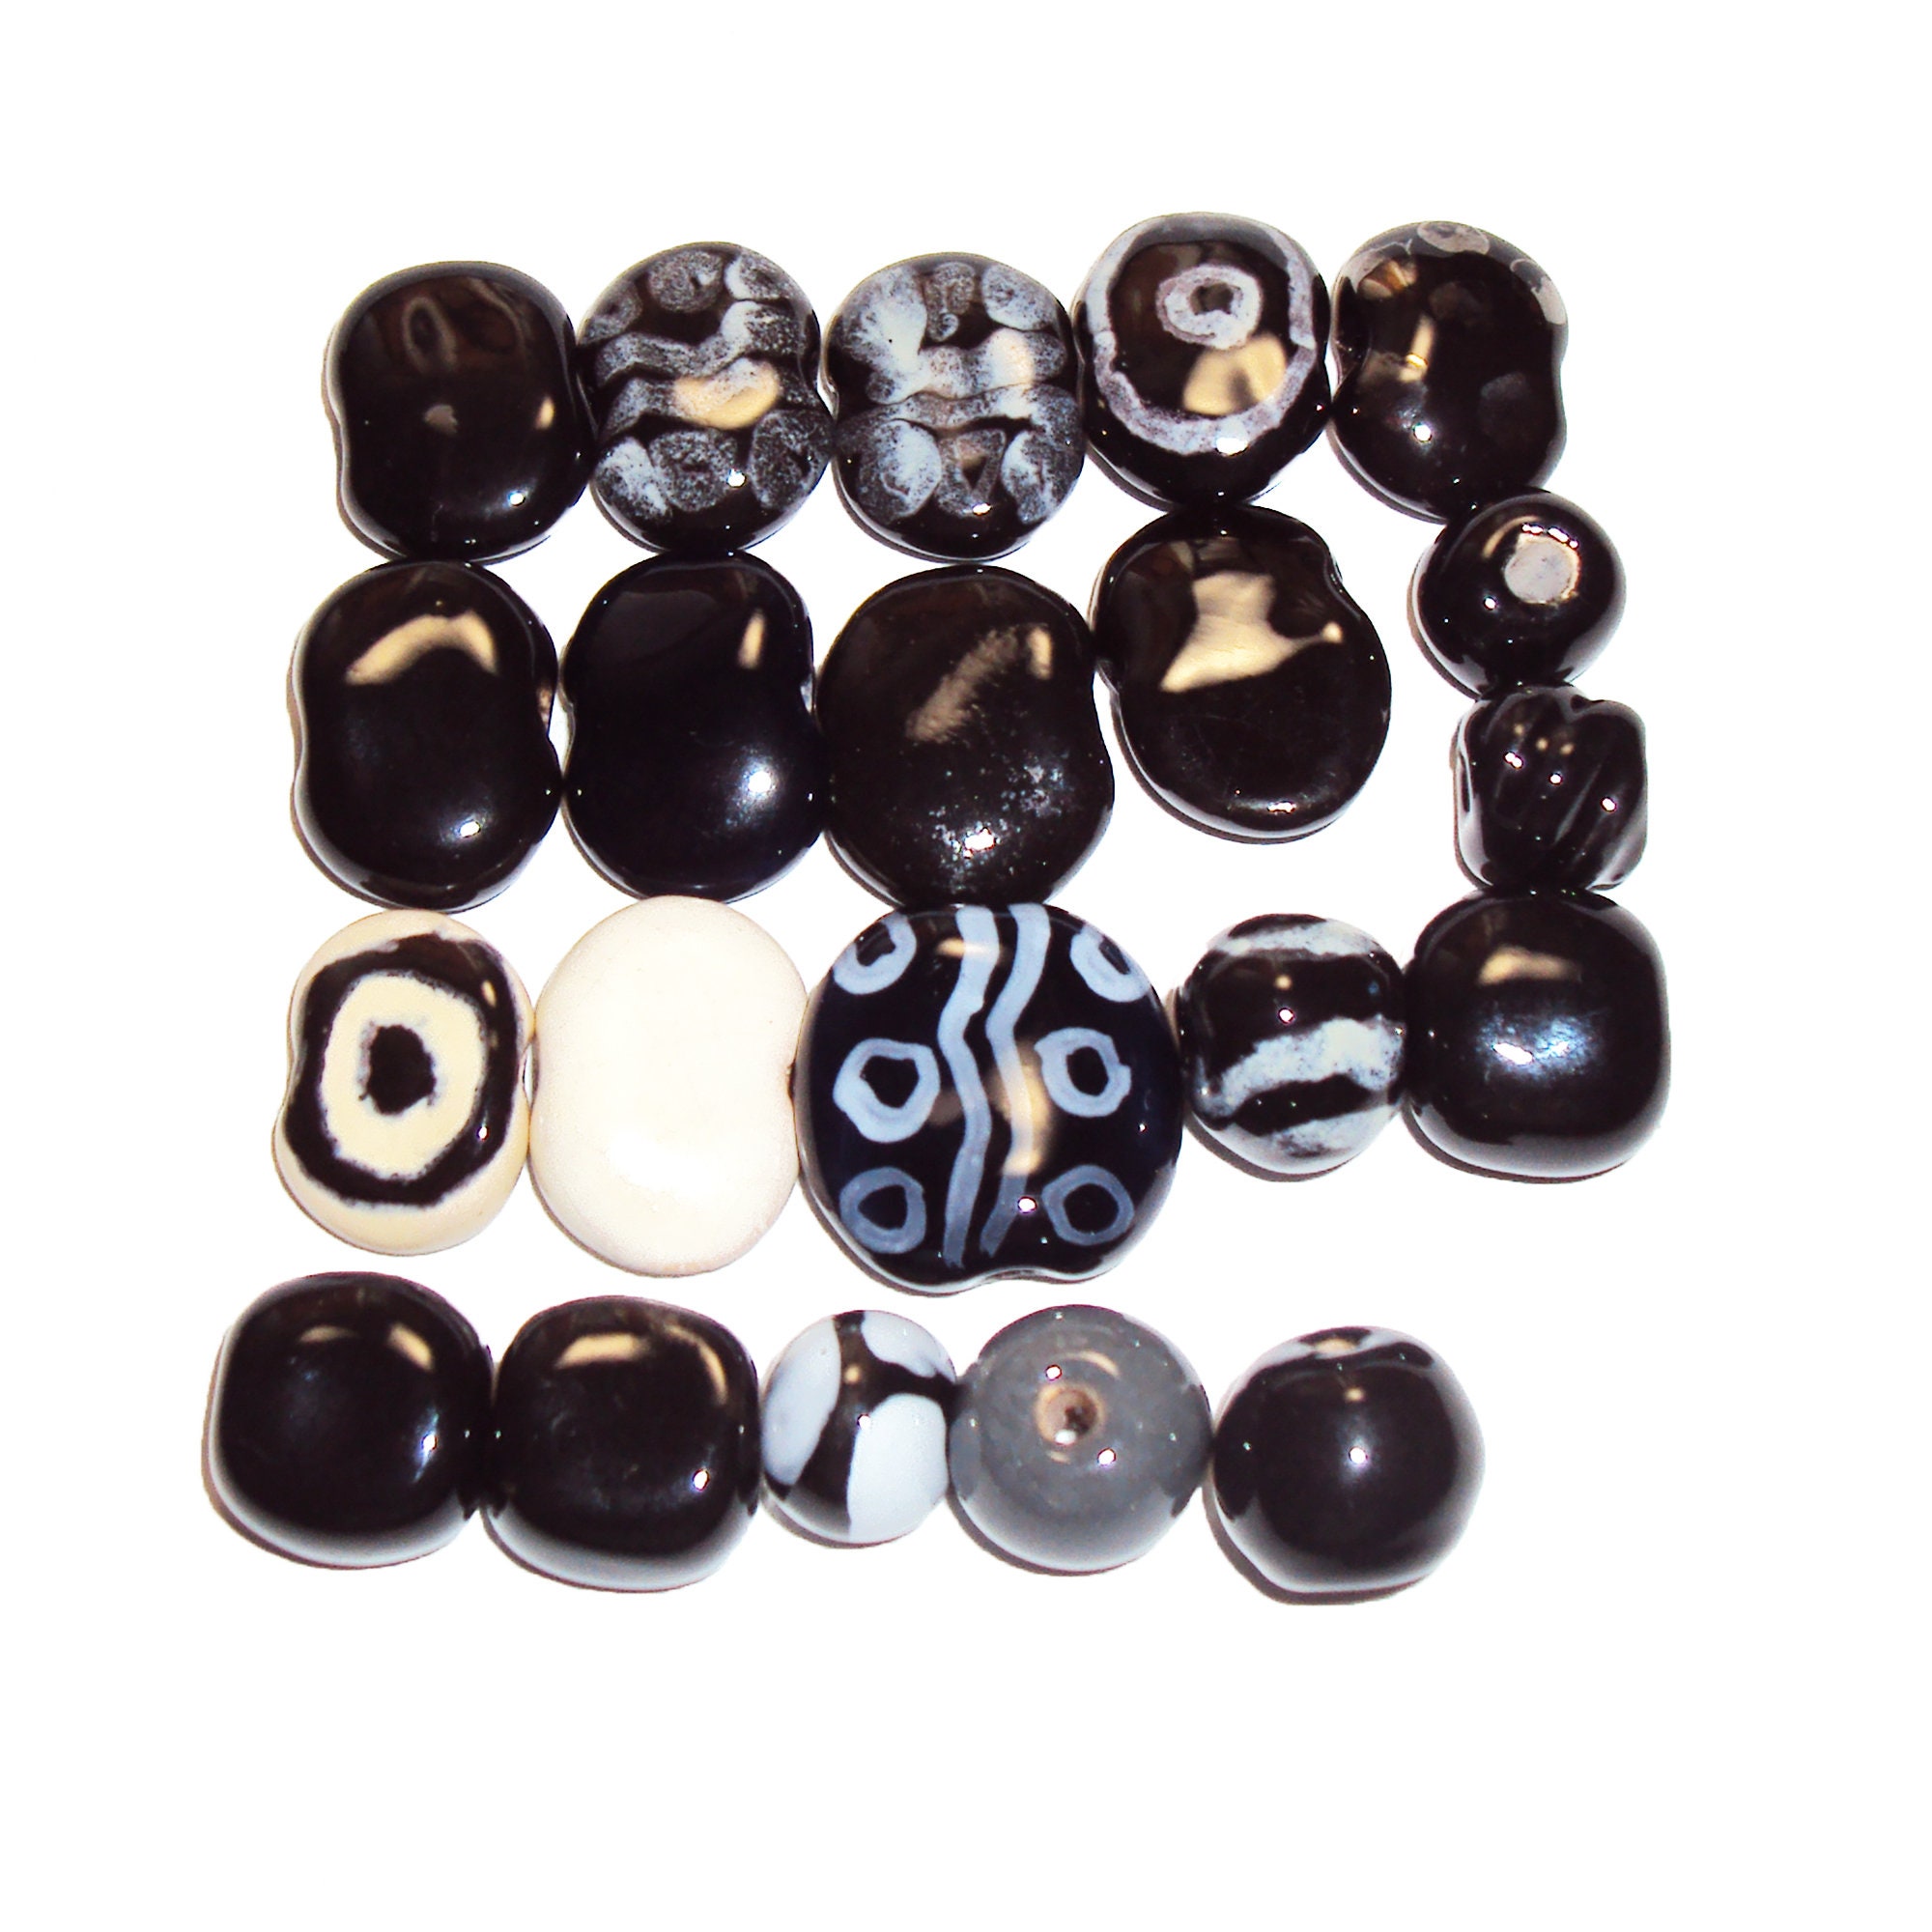 Limited Discounted Selections of Fair Trade Ceramic Beads from Africa Mixed Packs Kazuri Discounted Beads